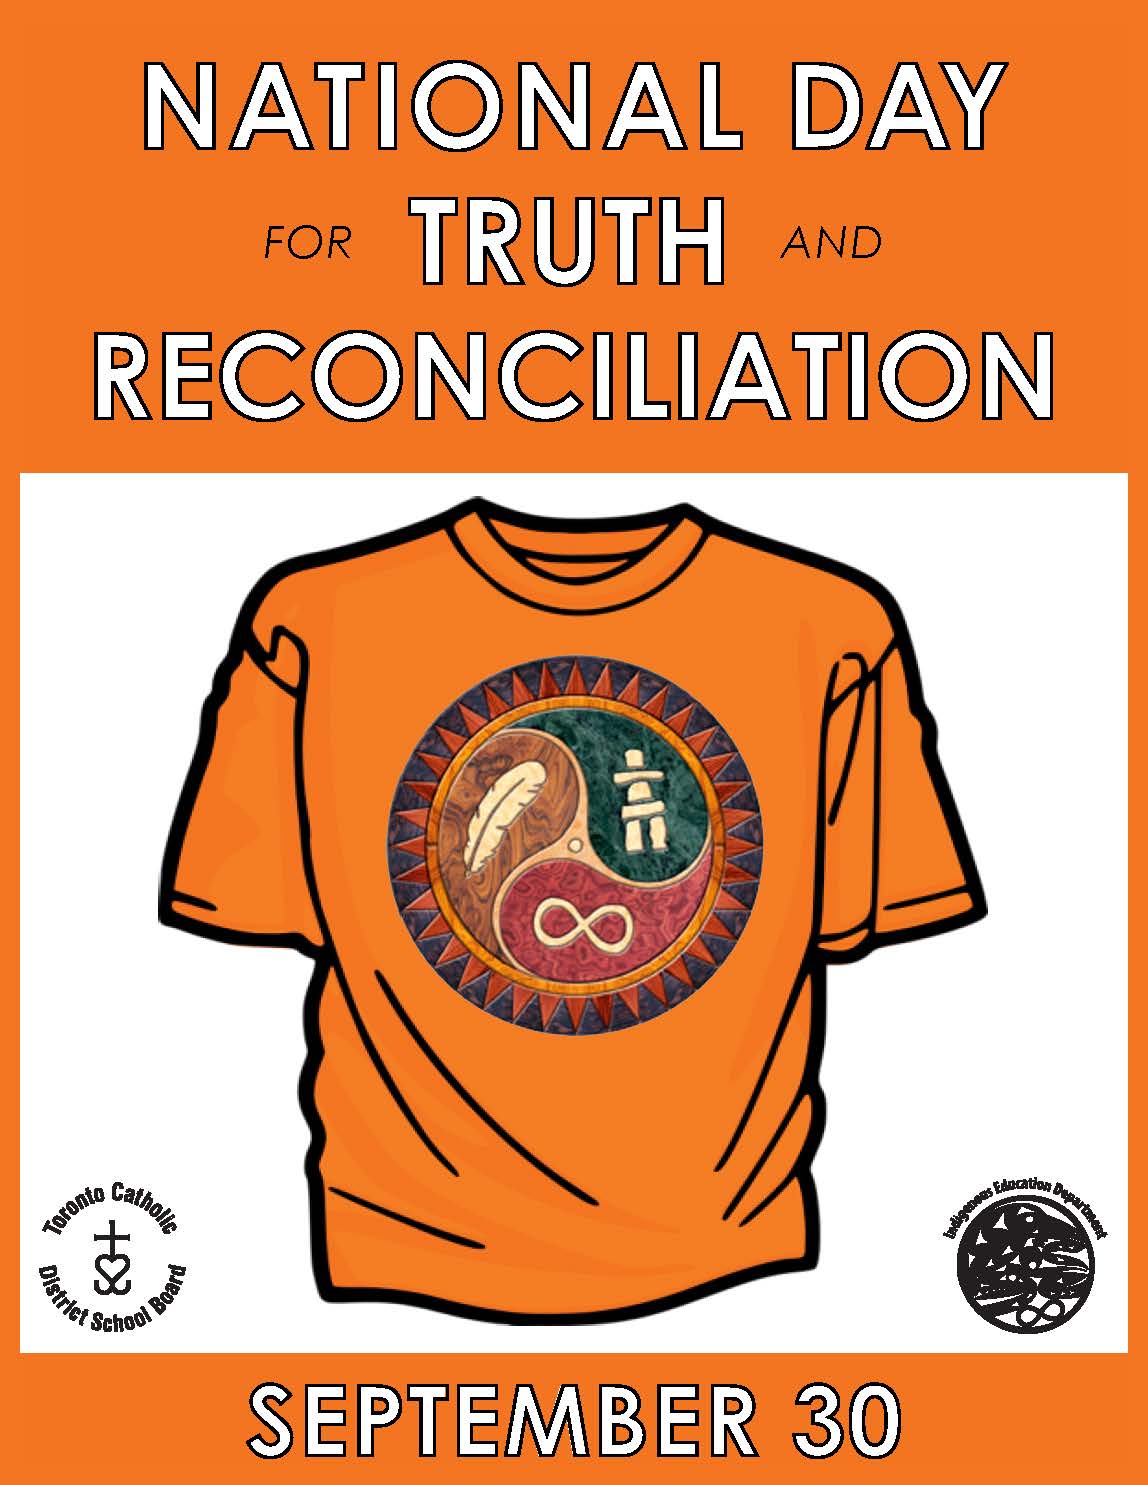 National Day for Truth and Reconciliation flyer